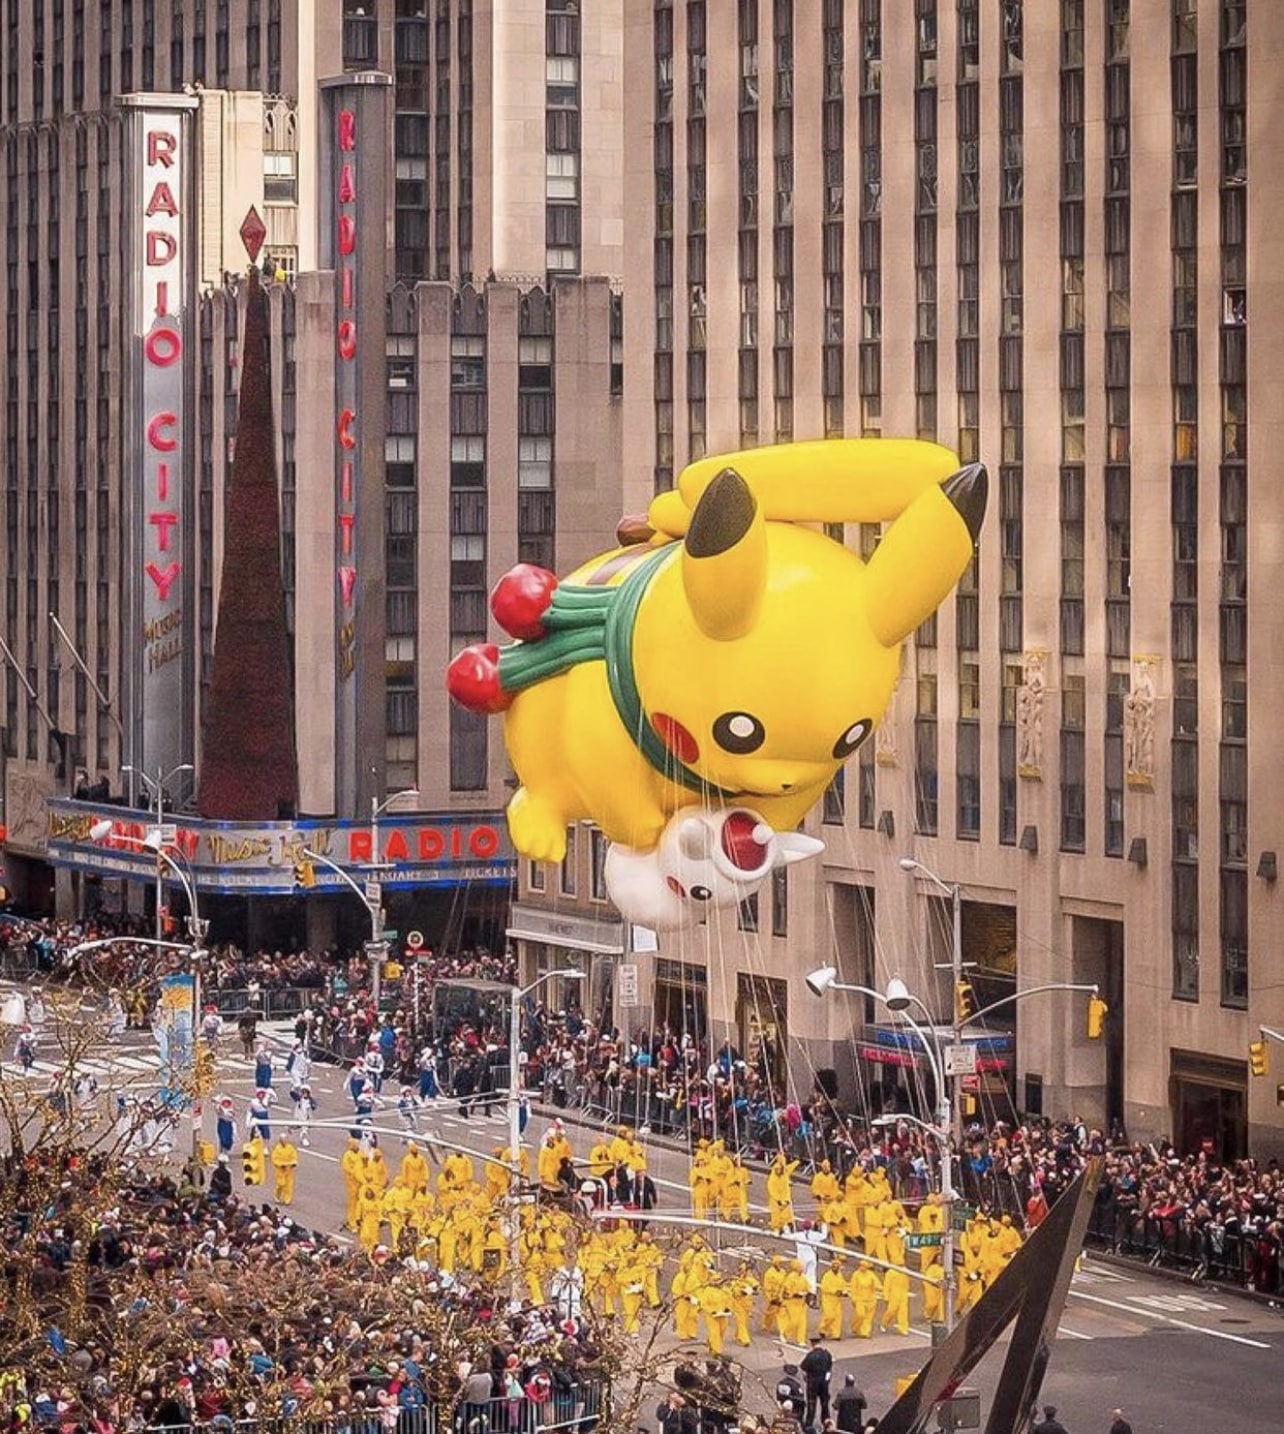 Macy's Thanksgiving Parade KEY INFO Discover NYC